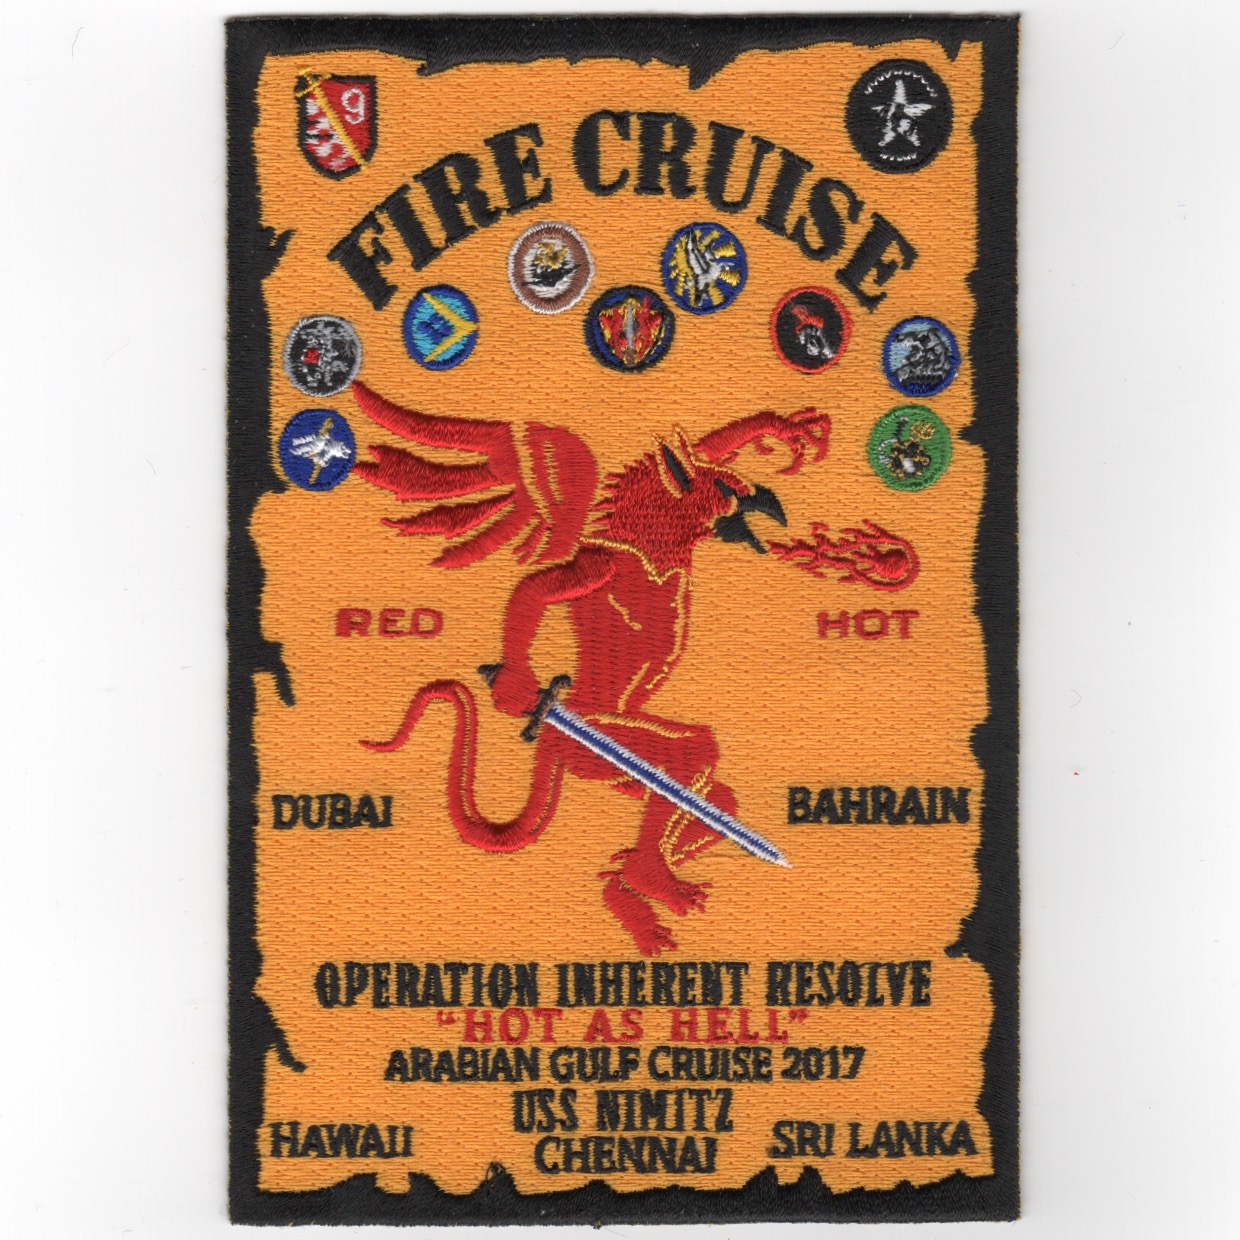 VFA-147/CVN-68 'FIRE CRUISE' Patch (Yellow)